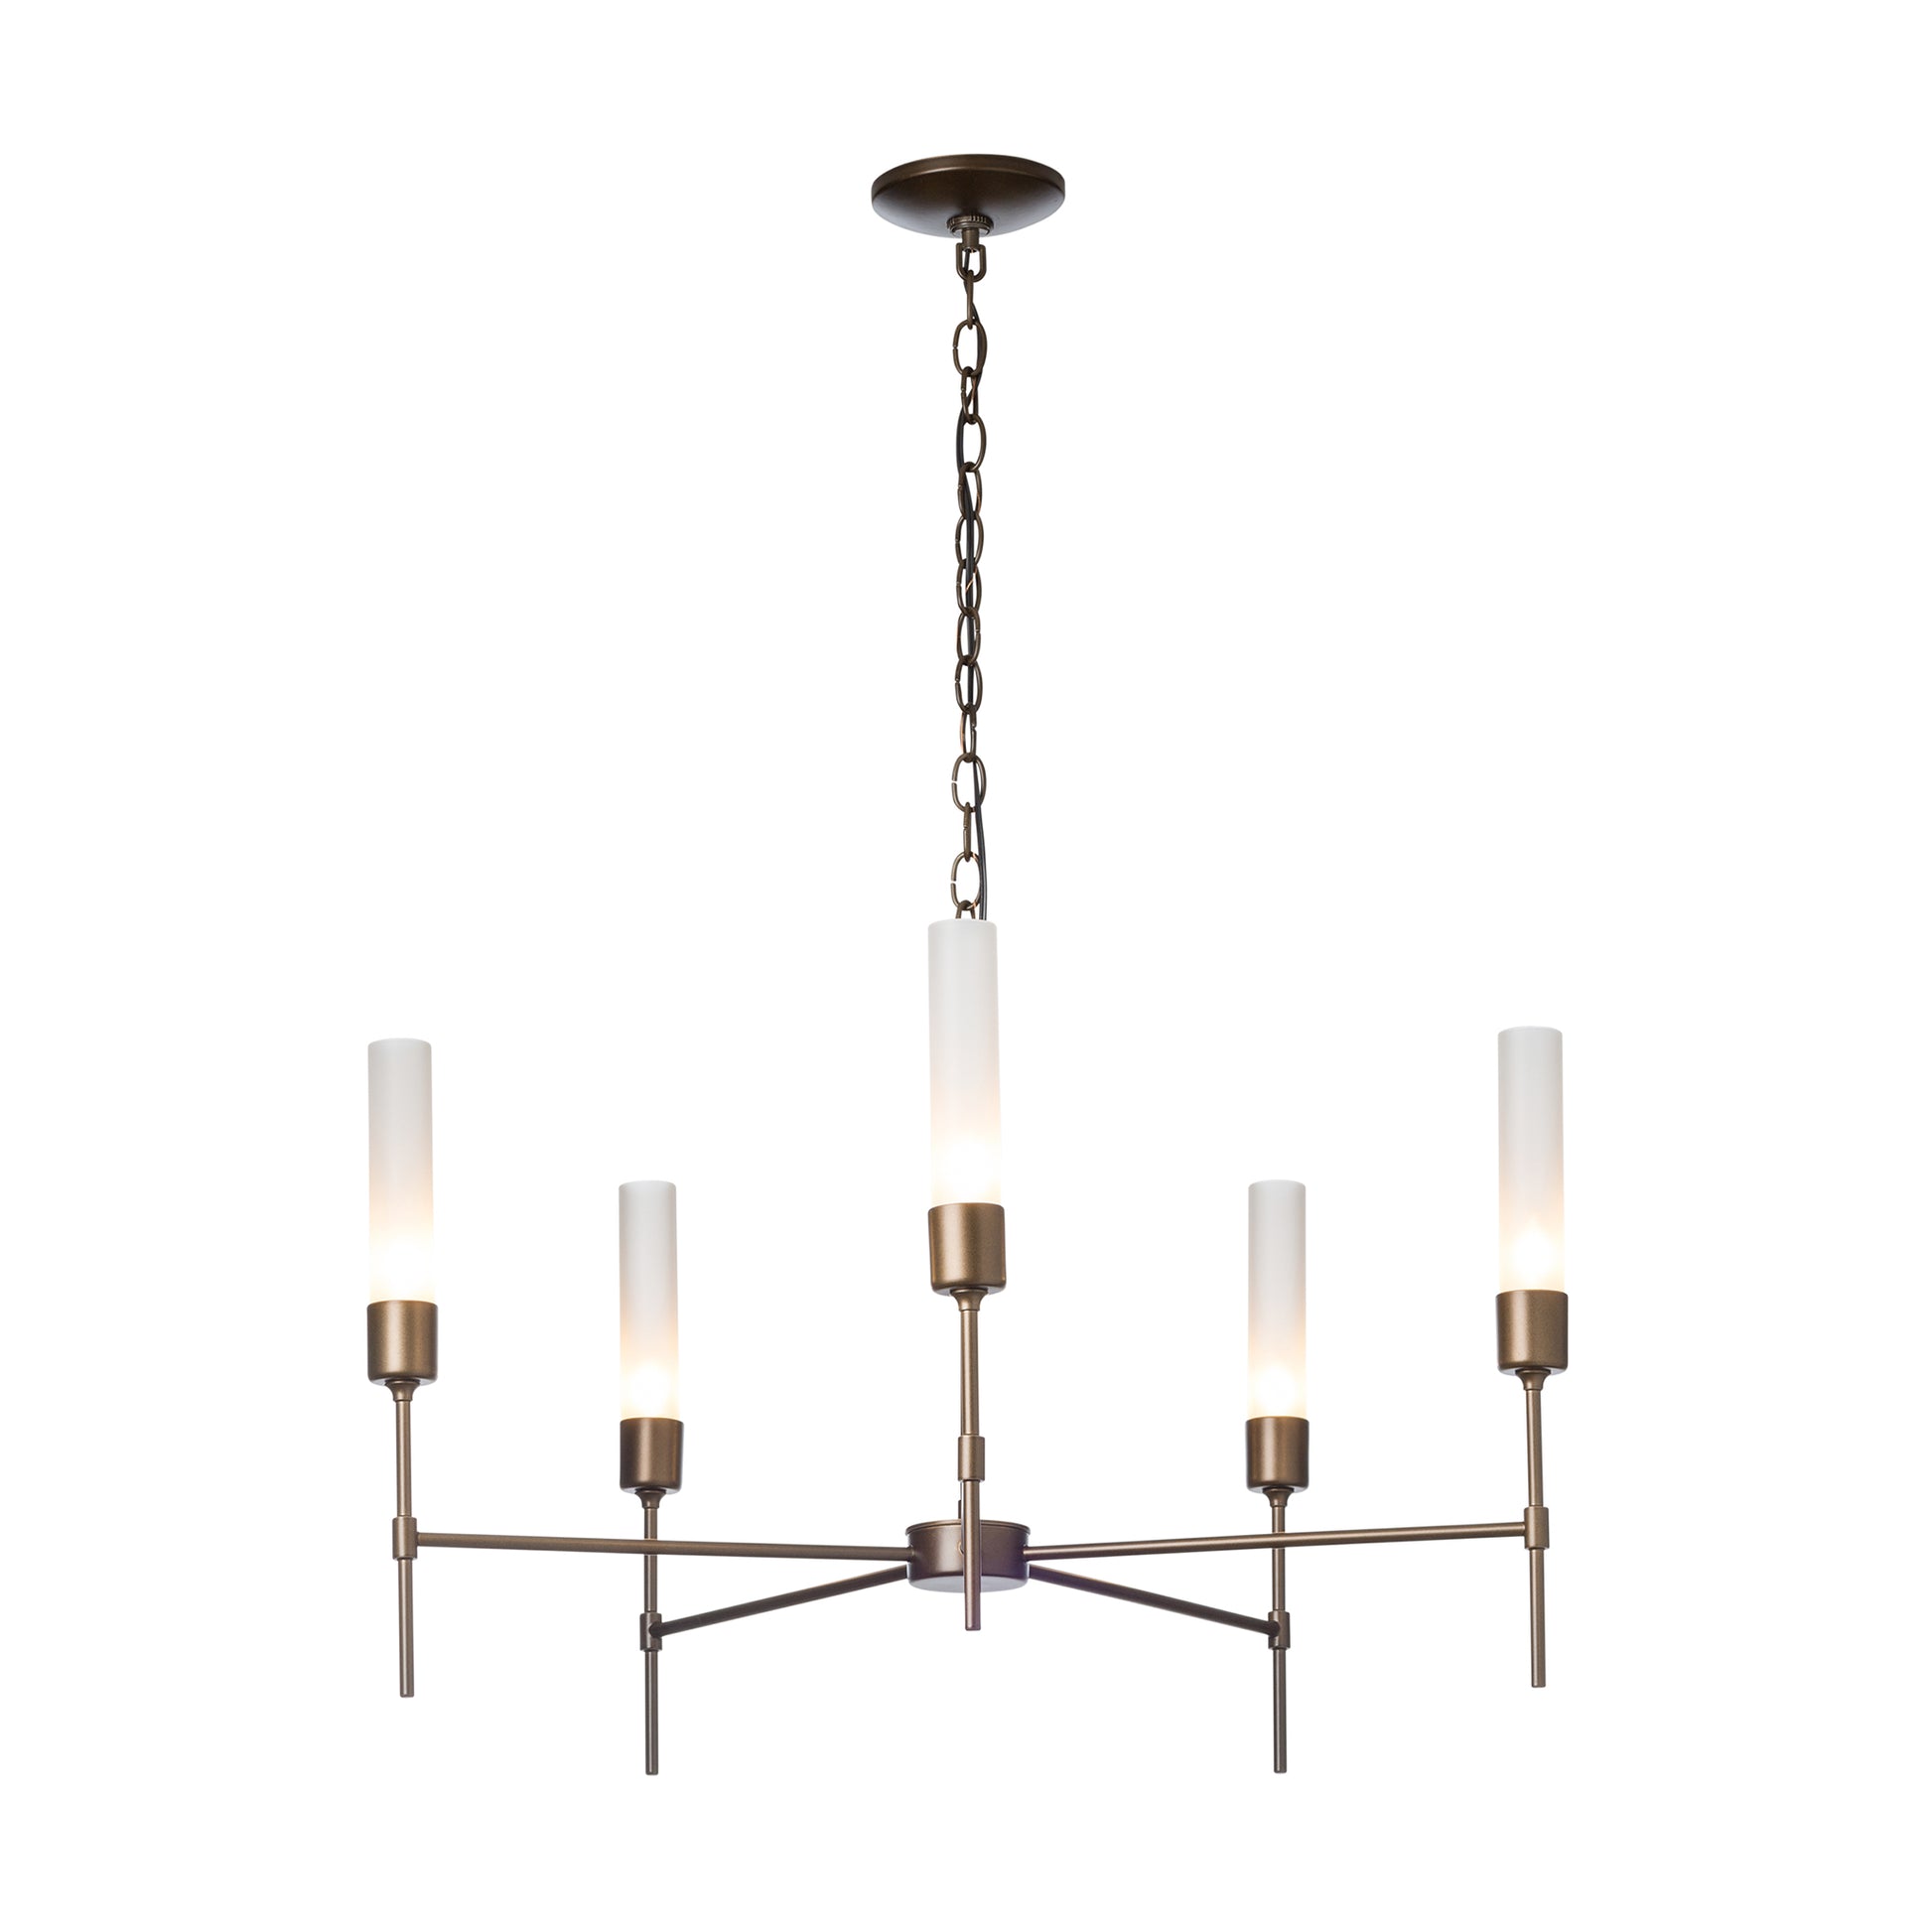 A Hubbardton Forge Vela 5-Arm Chandelier with a brass finish and five lights, featuring an elegant lighting design.